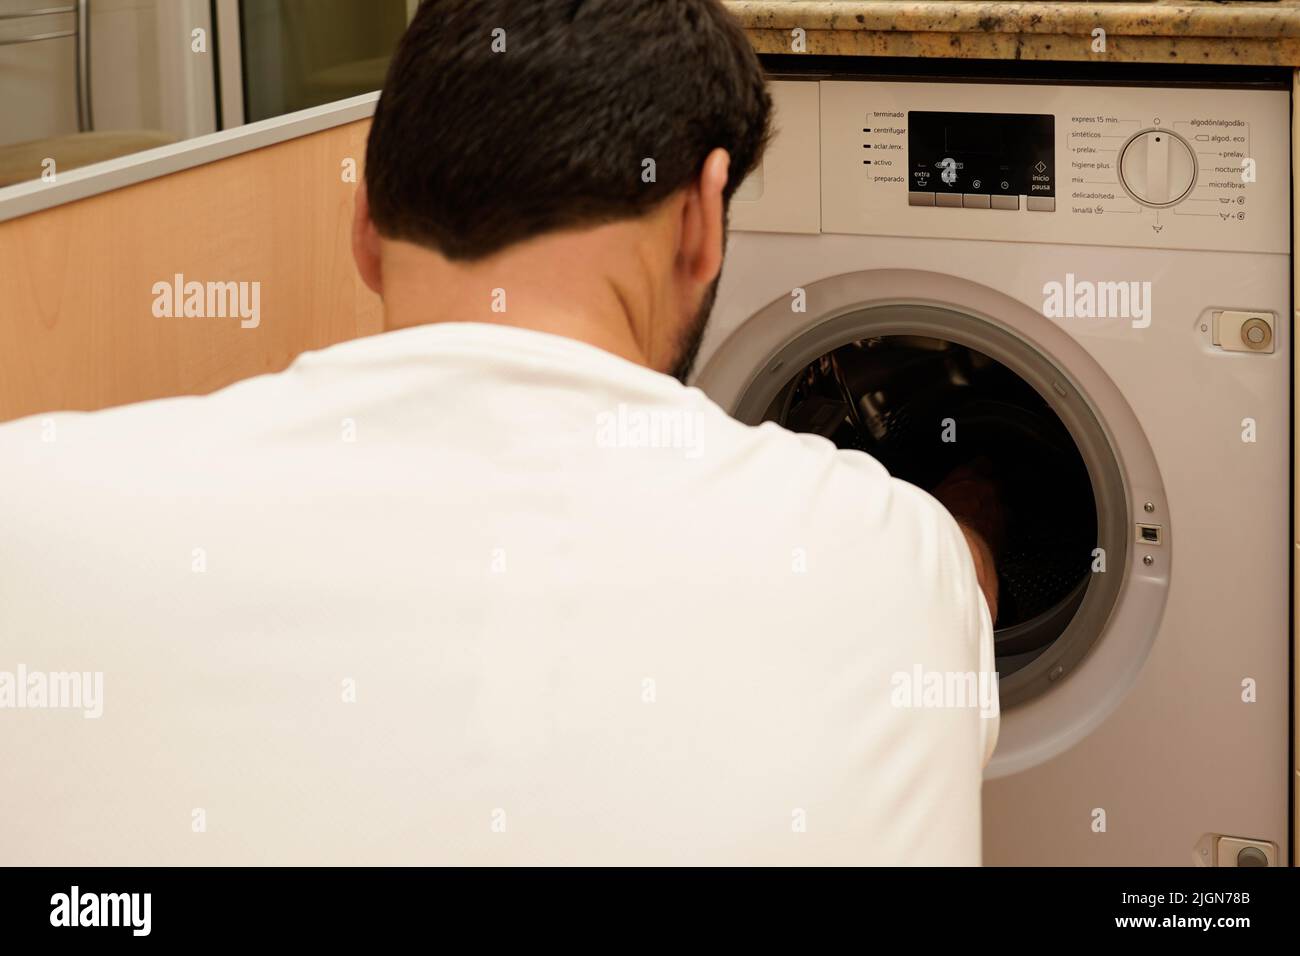 Man washing clothes. Concept of rising energy prices. Concept of electricity consumption Stock Photo